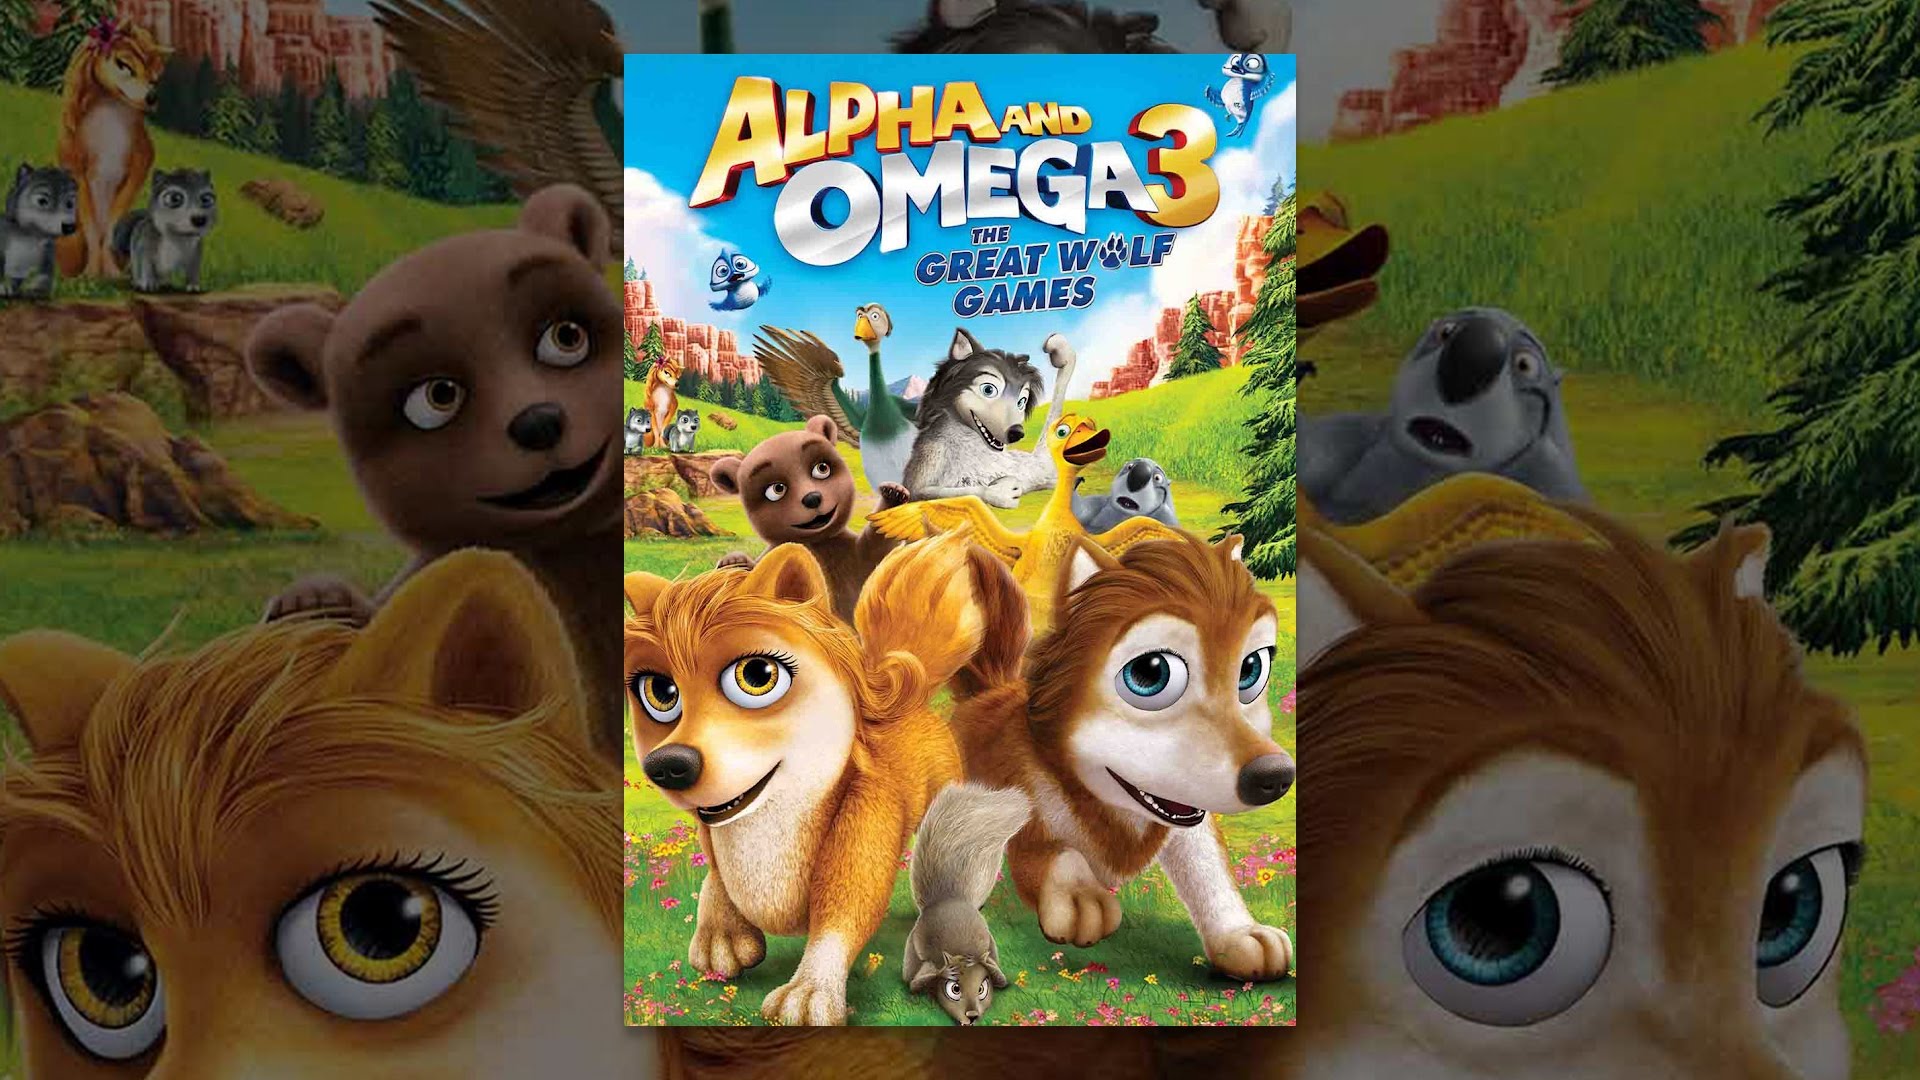 Download Alpha and Omega 3: The Great Wolf Games